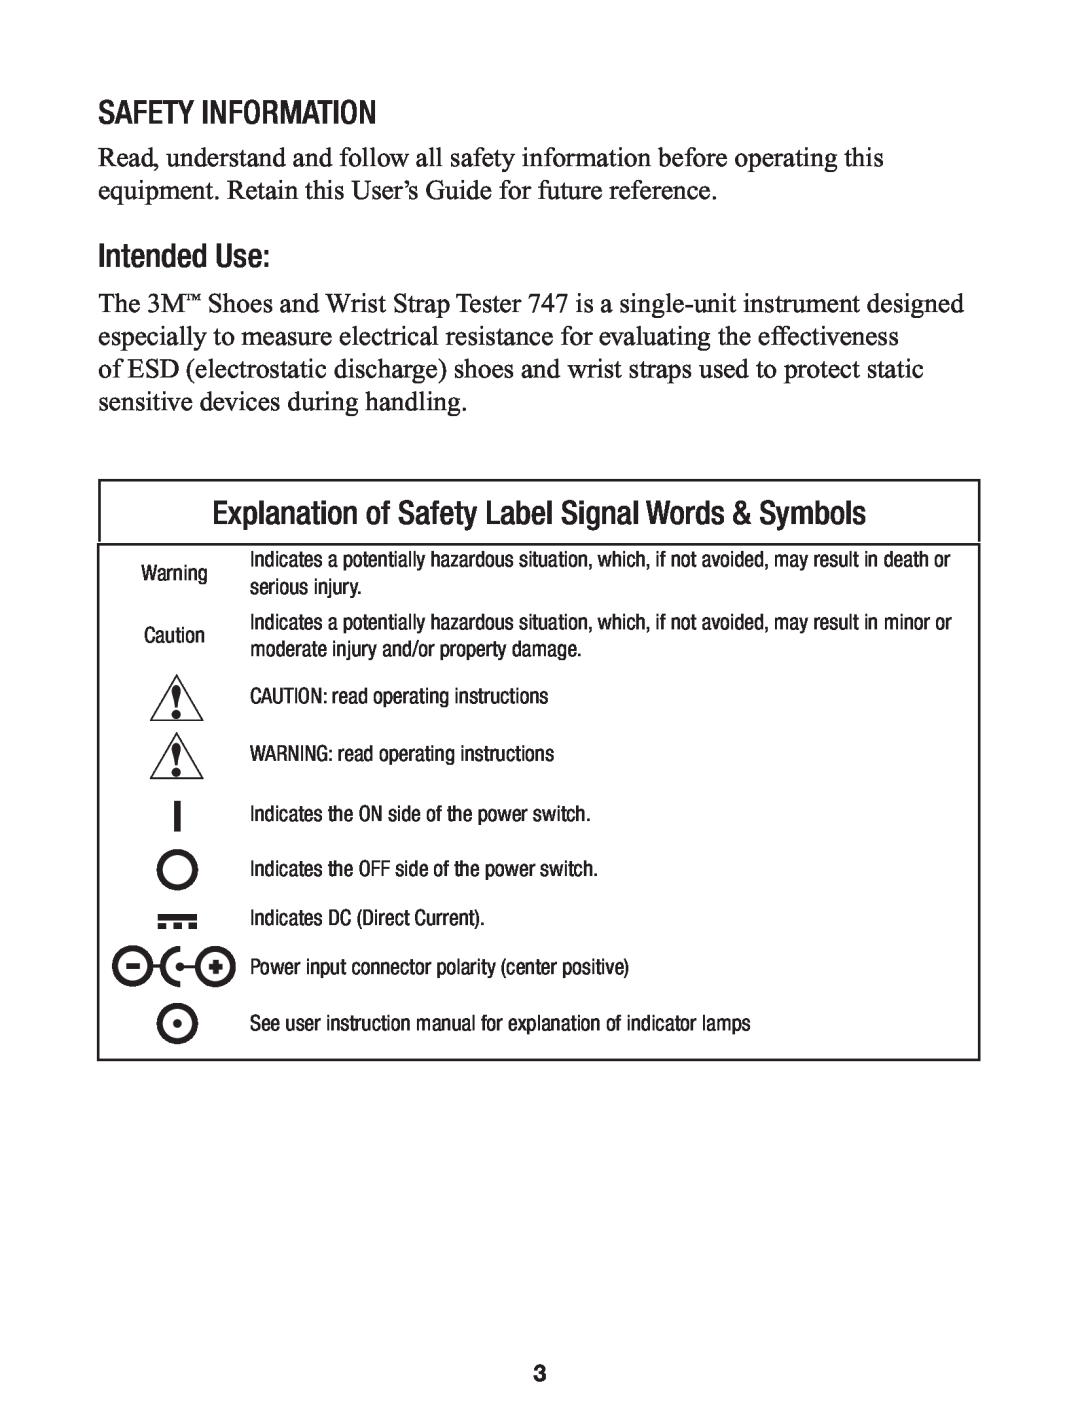 3M 747 manual Safety Information, Intended Use, Explanation of Safety Label Signal Words & Symbols 